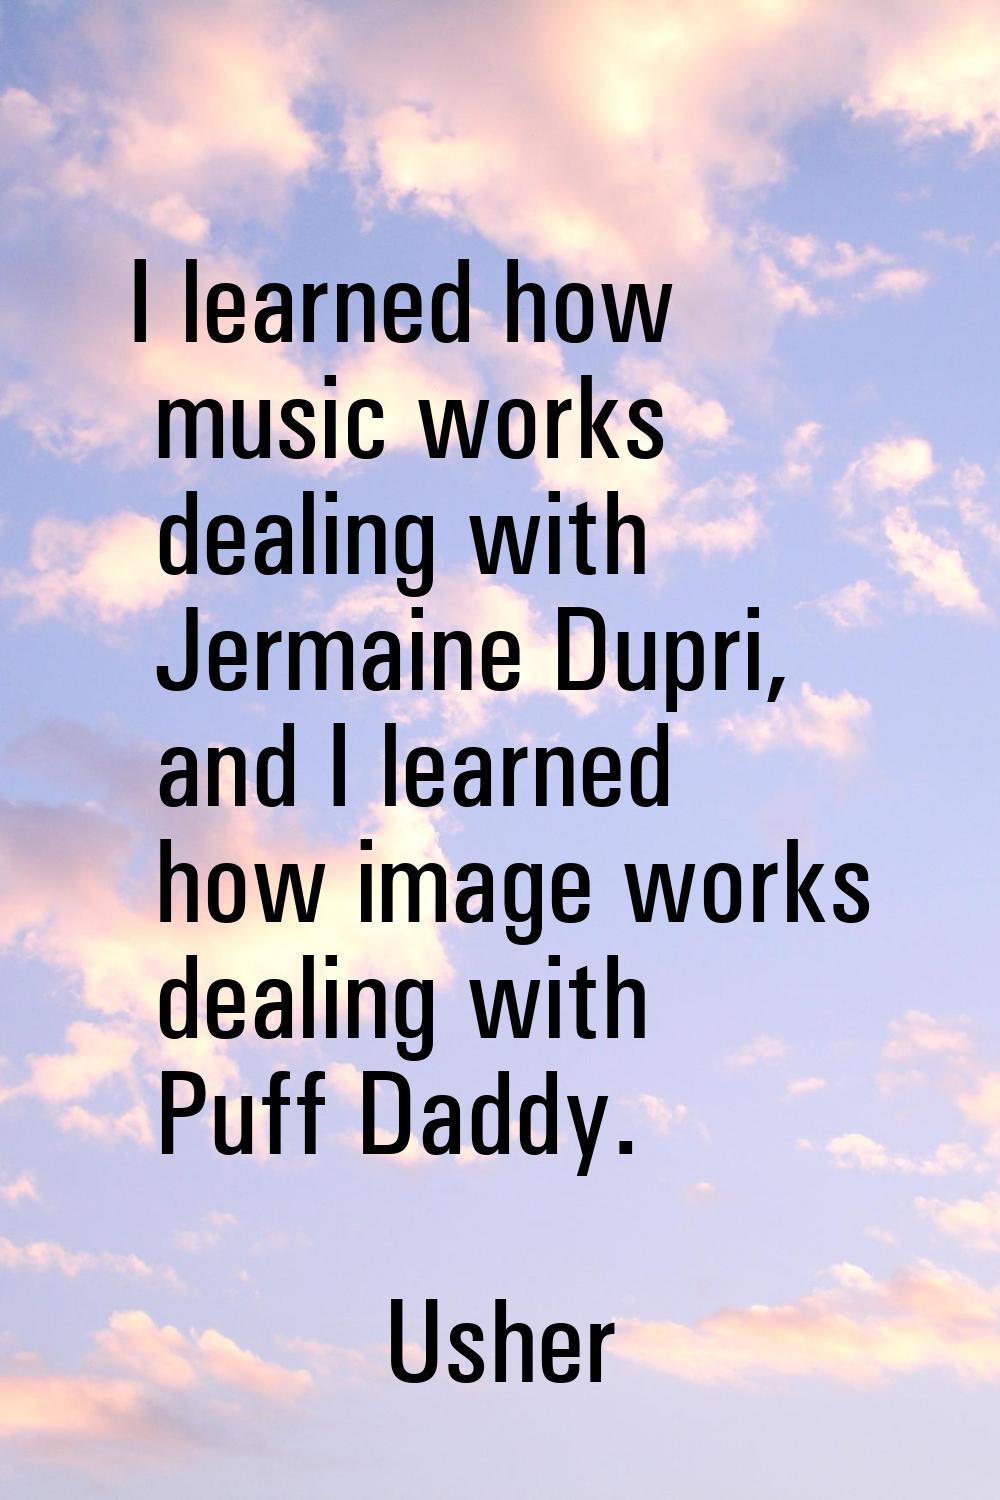 I learned how music works dealing with Jermaine Dupri, and I learned how image works dealing with P